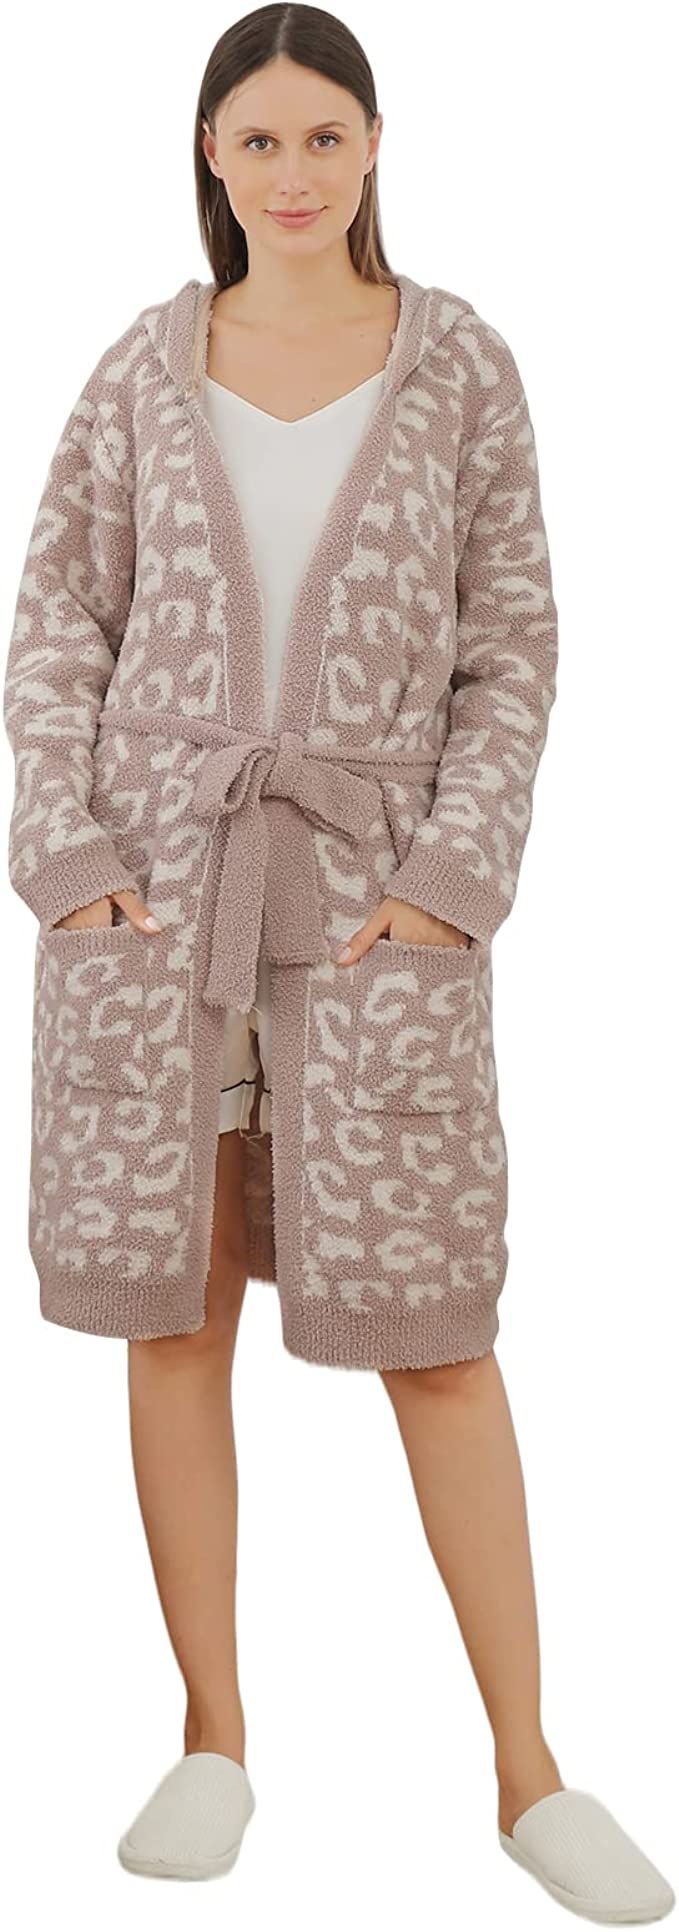 Bearberry Hooded Robe Cozy Chic In The Wild Robe Lightweight Soft Plush Bathrobe with Pockets for... | Amazon (US)